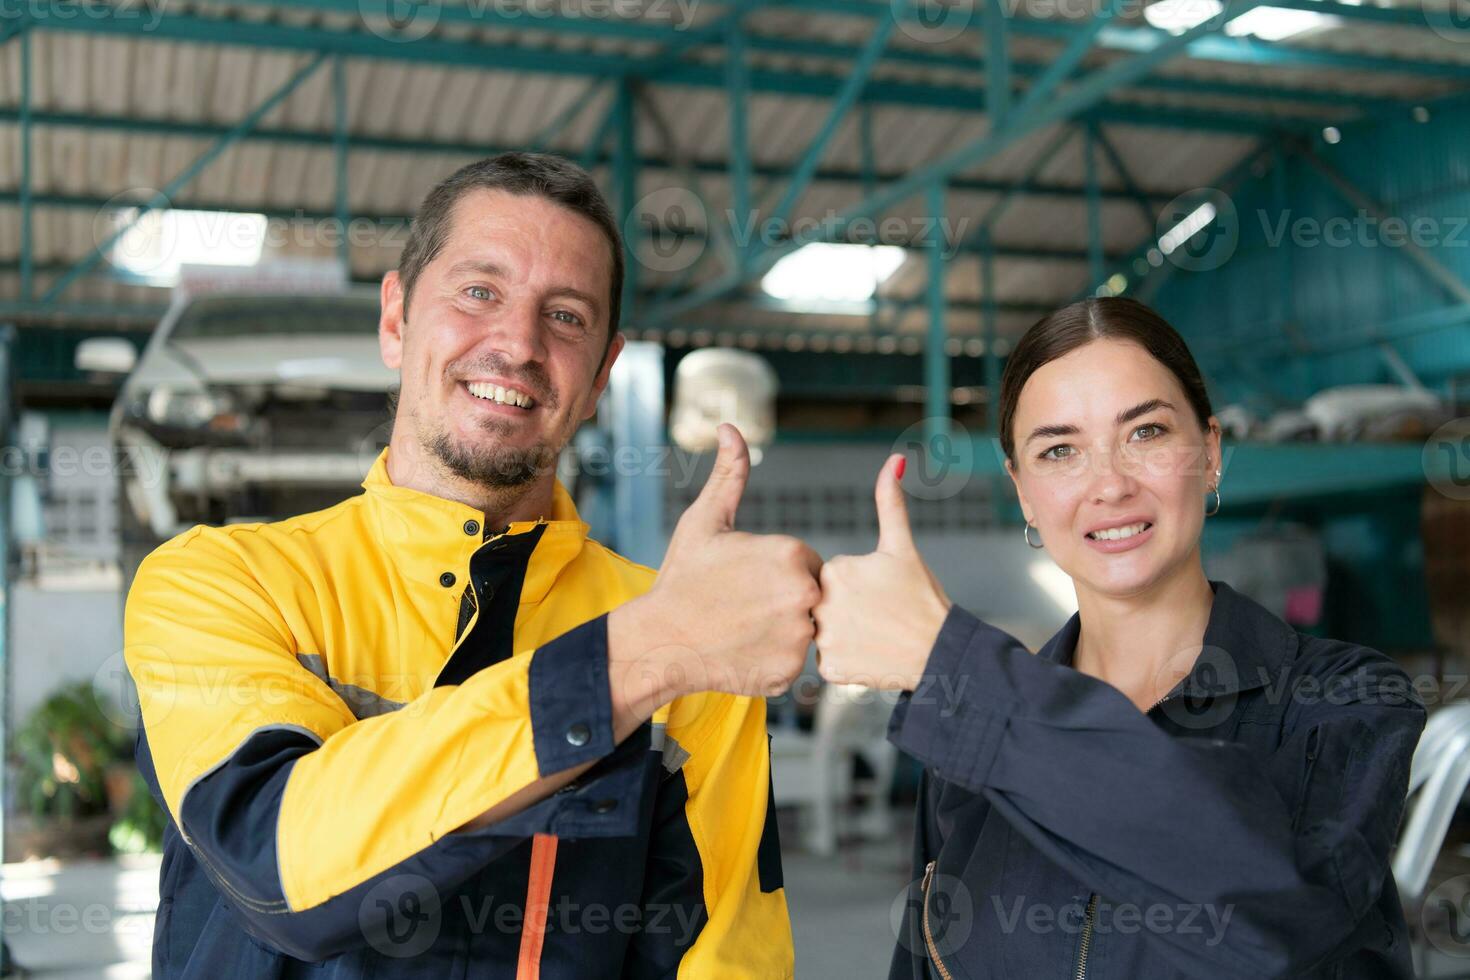 Portrait of engineer and auto mechanic with working on engine repairs in car garages photo